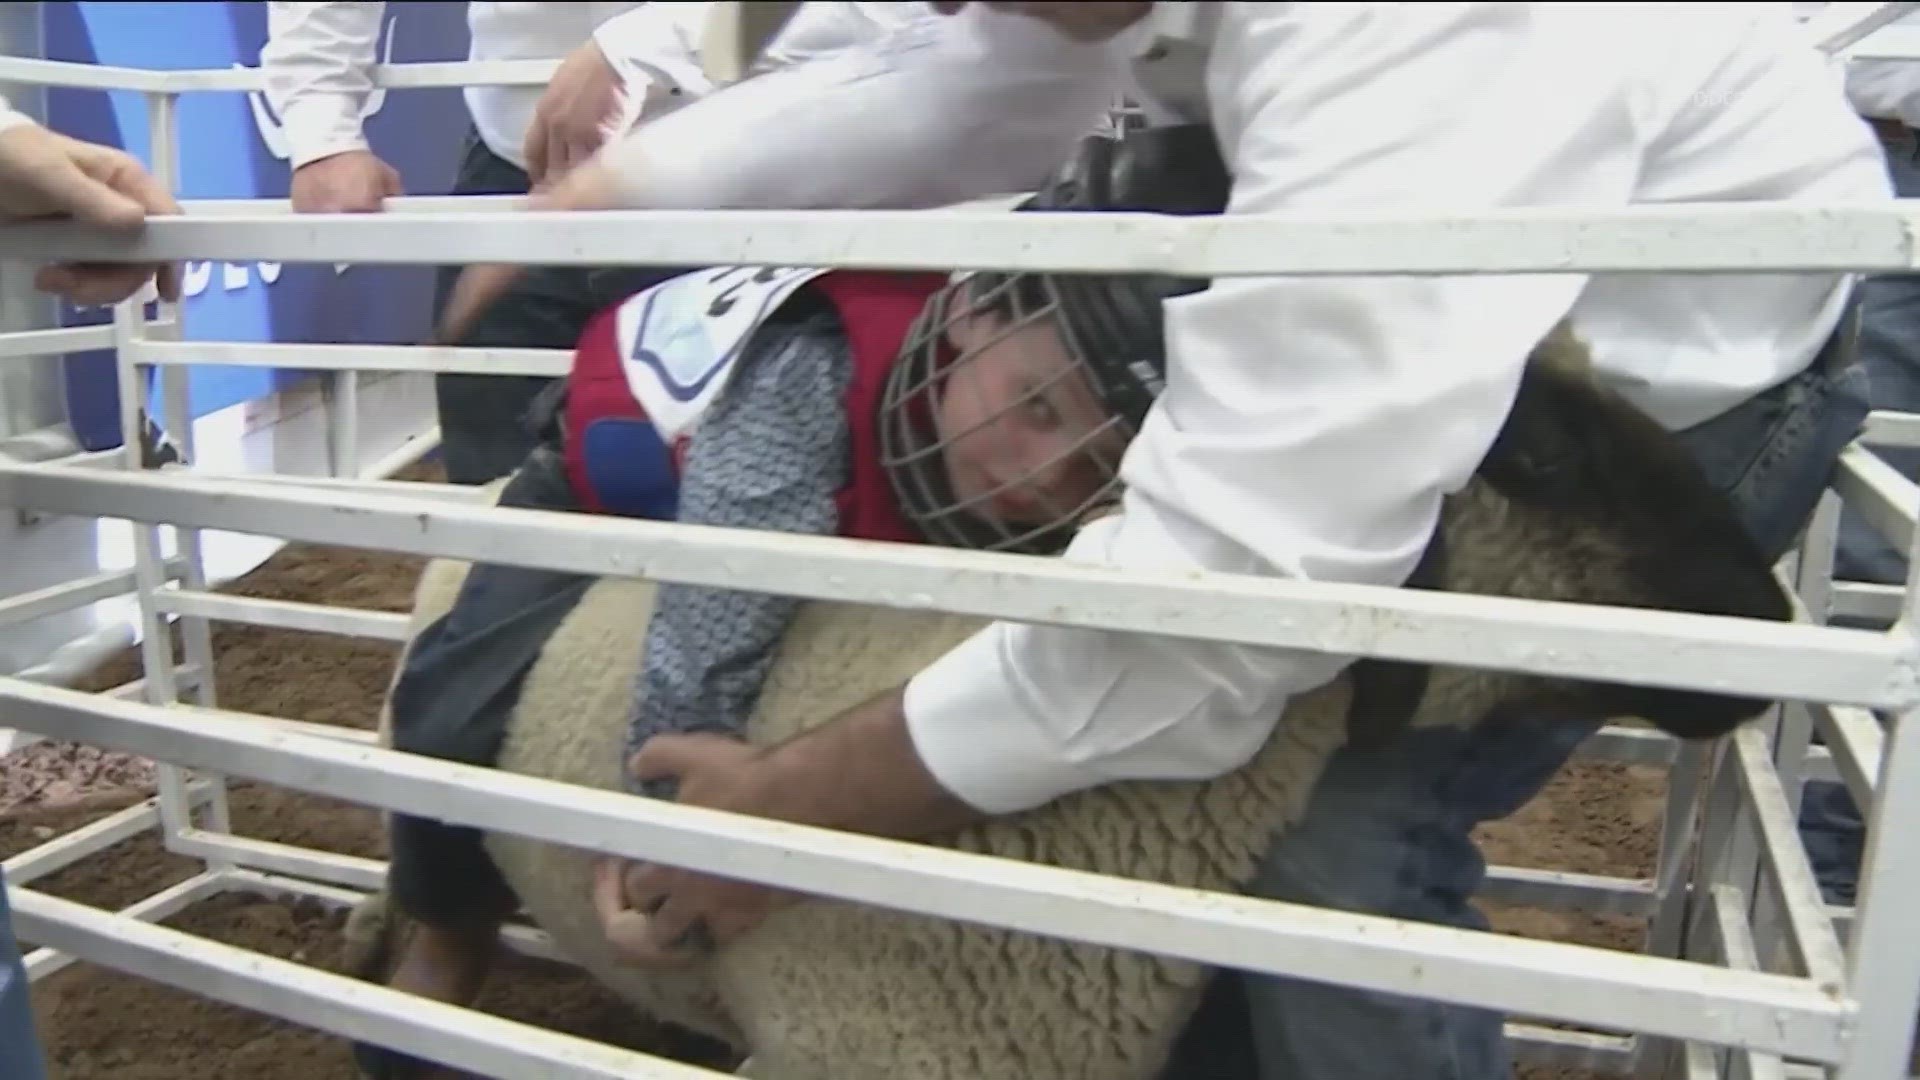 Thursday on KVUE Daybreak, we introduced you to 5-year-old Hayes Hensley, a future mutton busting competitor. Here's how he did in his competition!